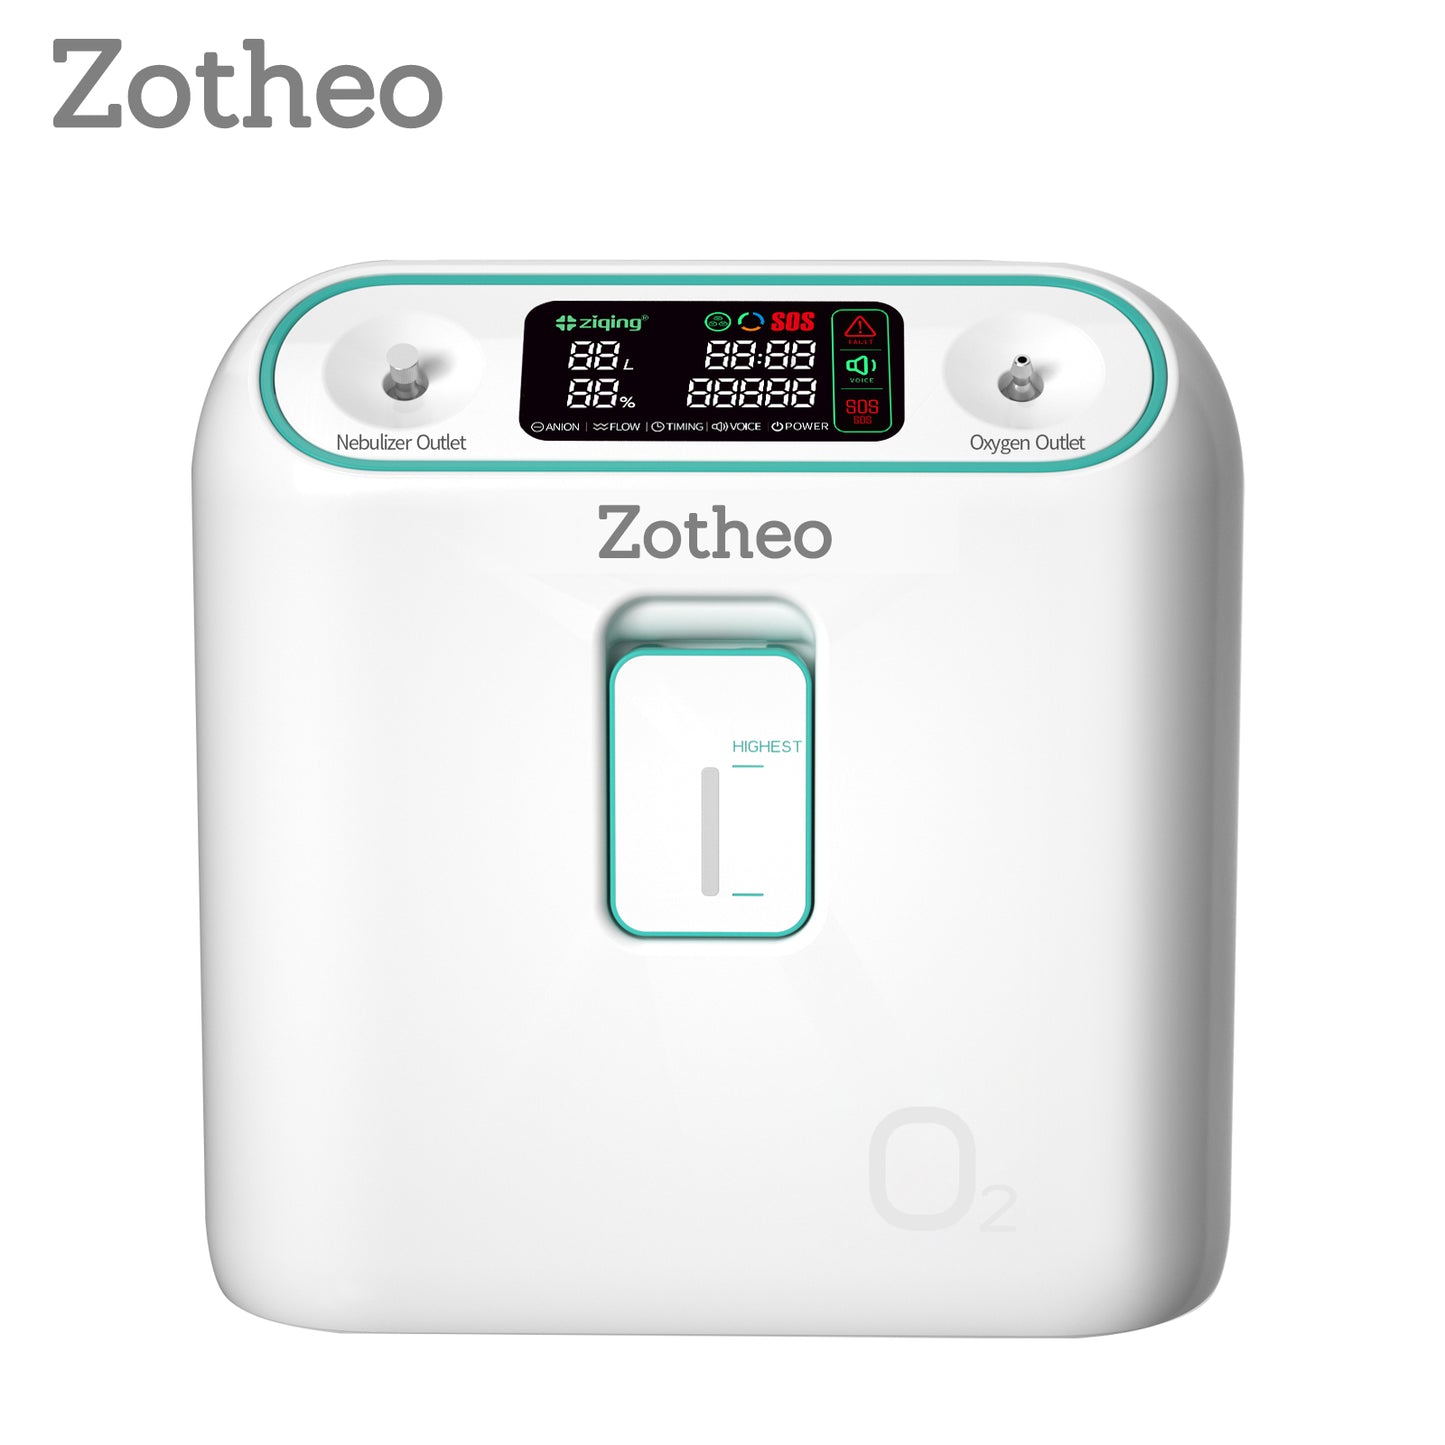 Zotheo oxygen concentrator high quality oxygenerator adjustable flow 1-8L